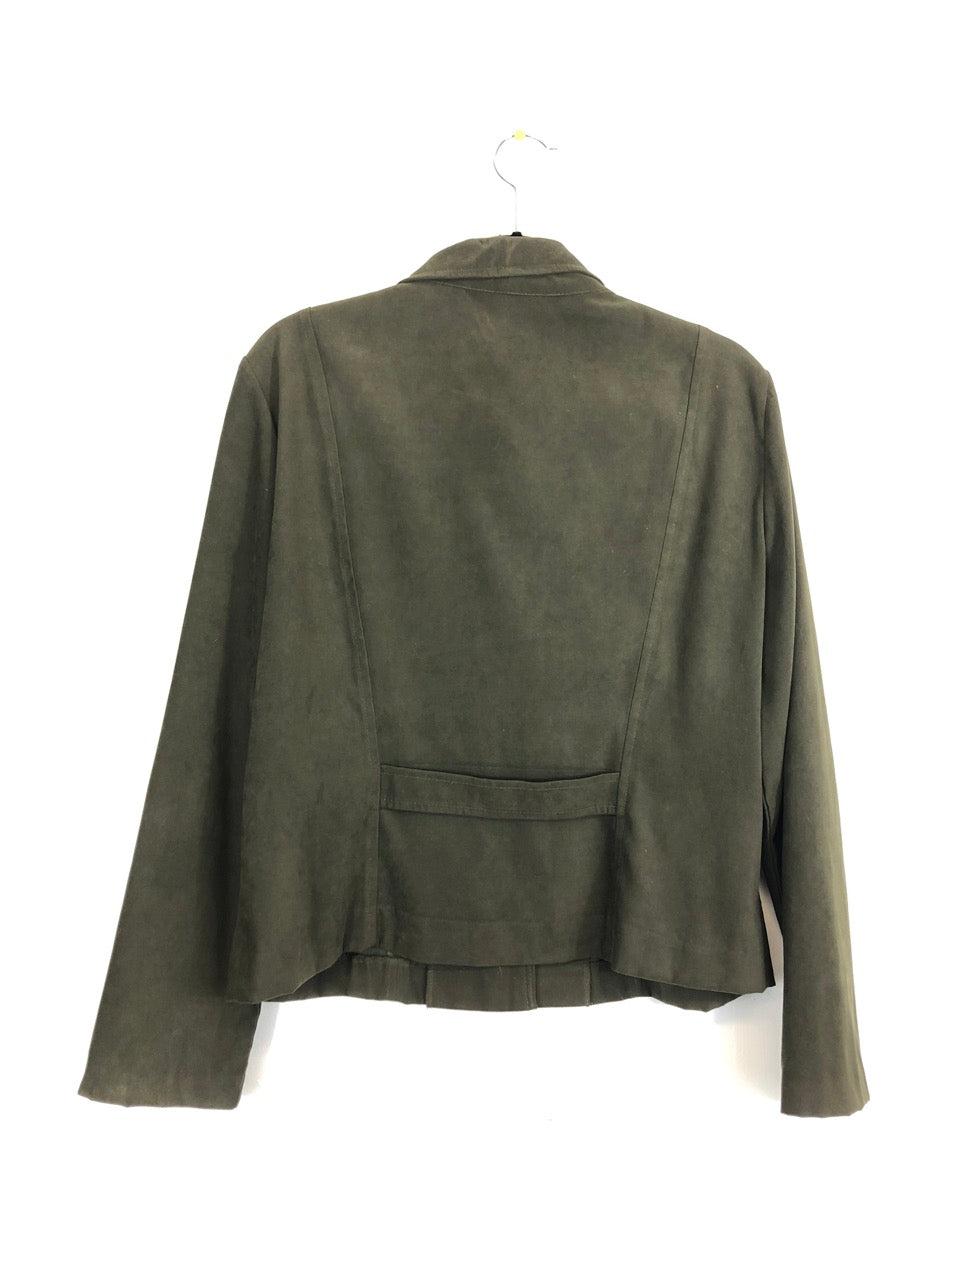 Just in Thyme Ltd. Jacket